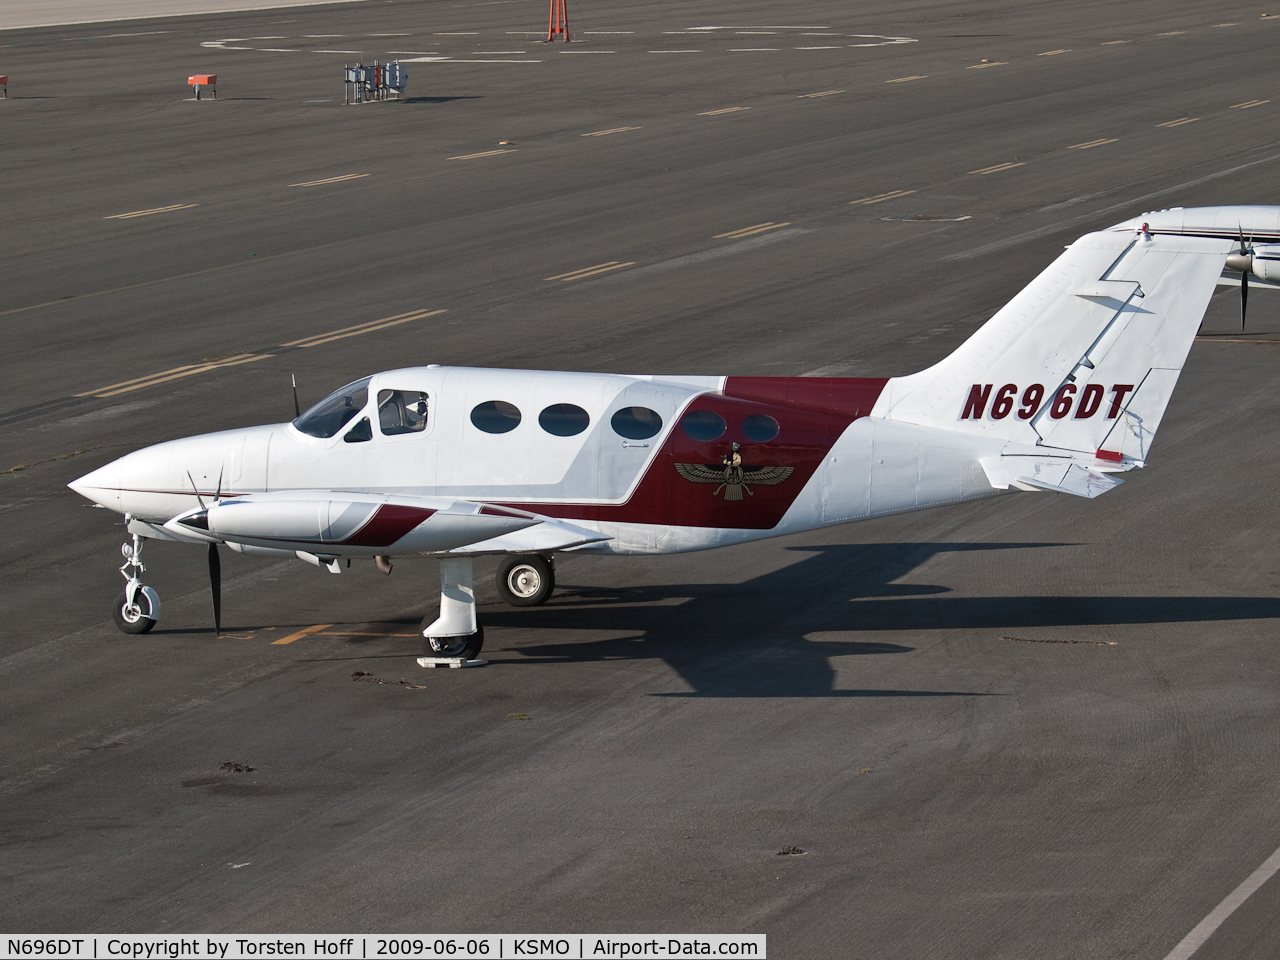 N696DT, 1973 Cessna 414 Chancellor Chancellor C/N 414-0370, N696DT parked on the tarmac at KSMO